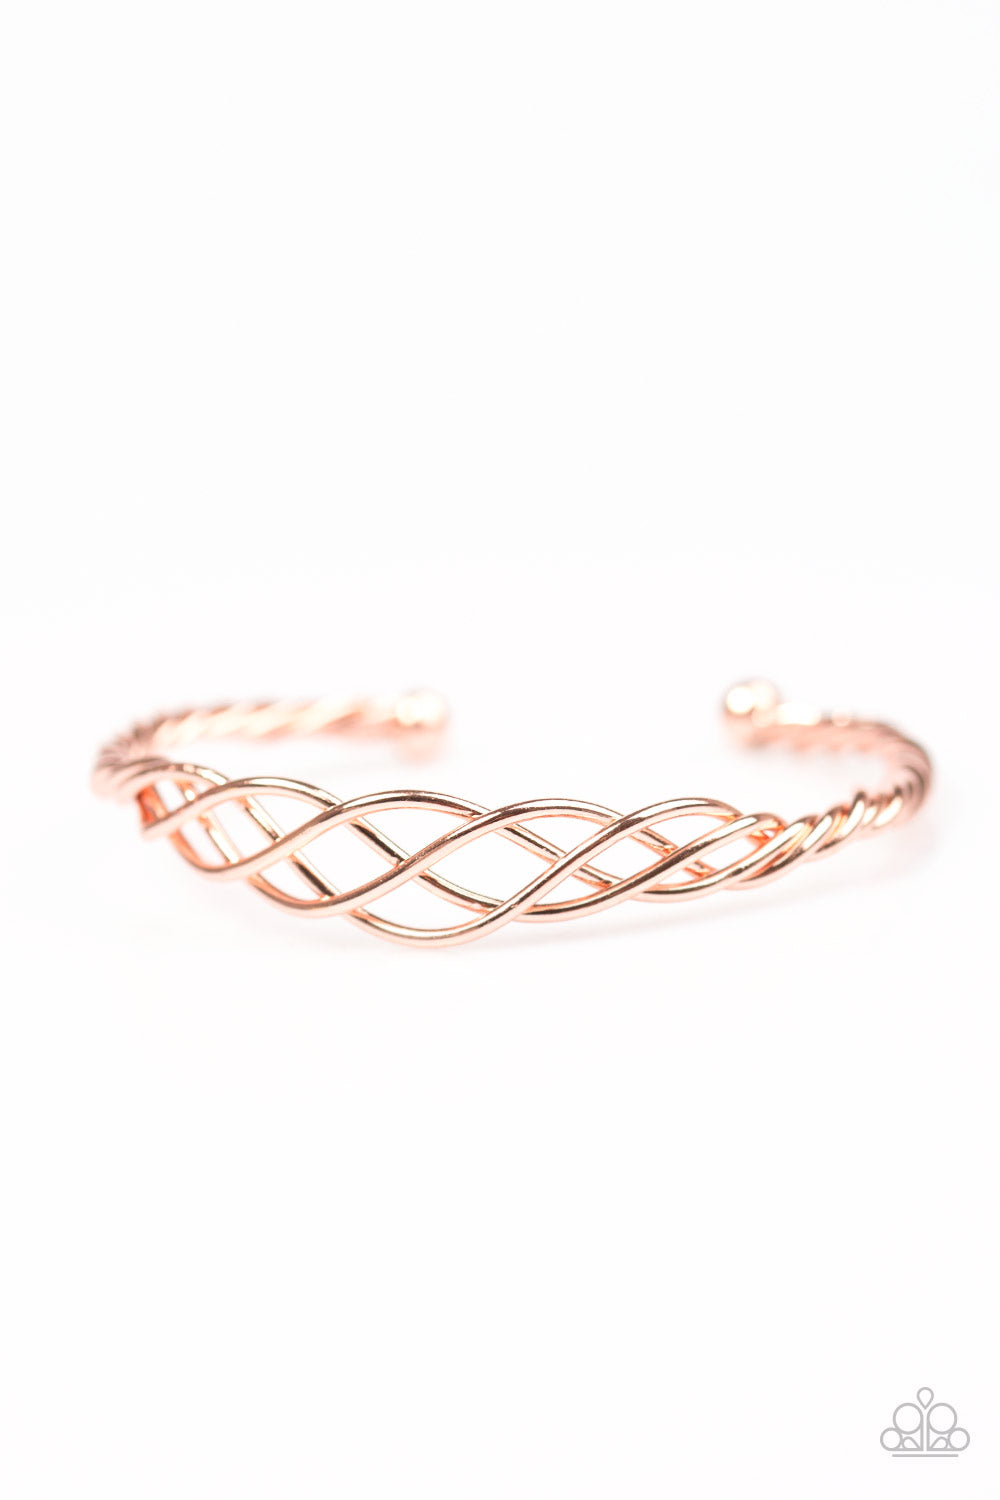 Paparazzi Accessories Metro Melody - Rose Gold Bracelets - Lady T Accessories